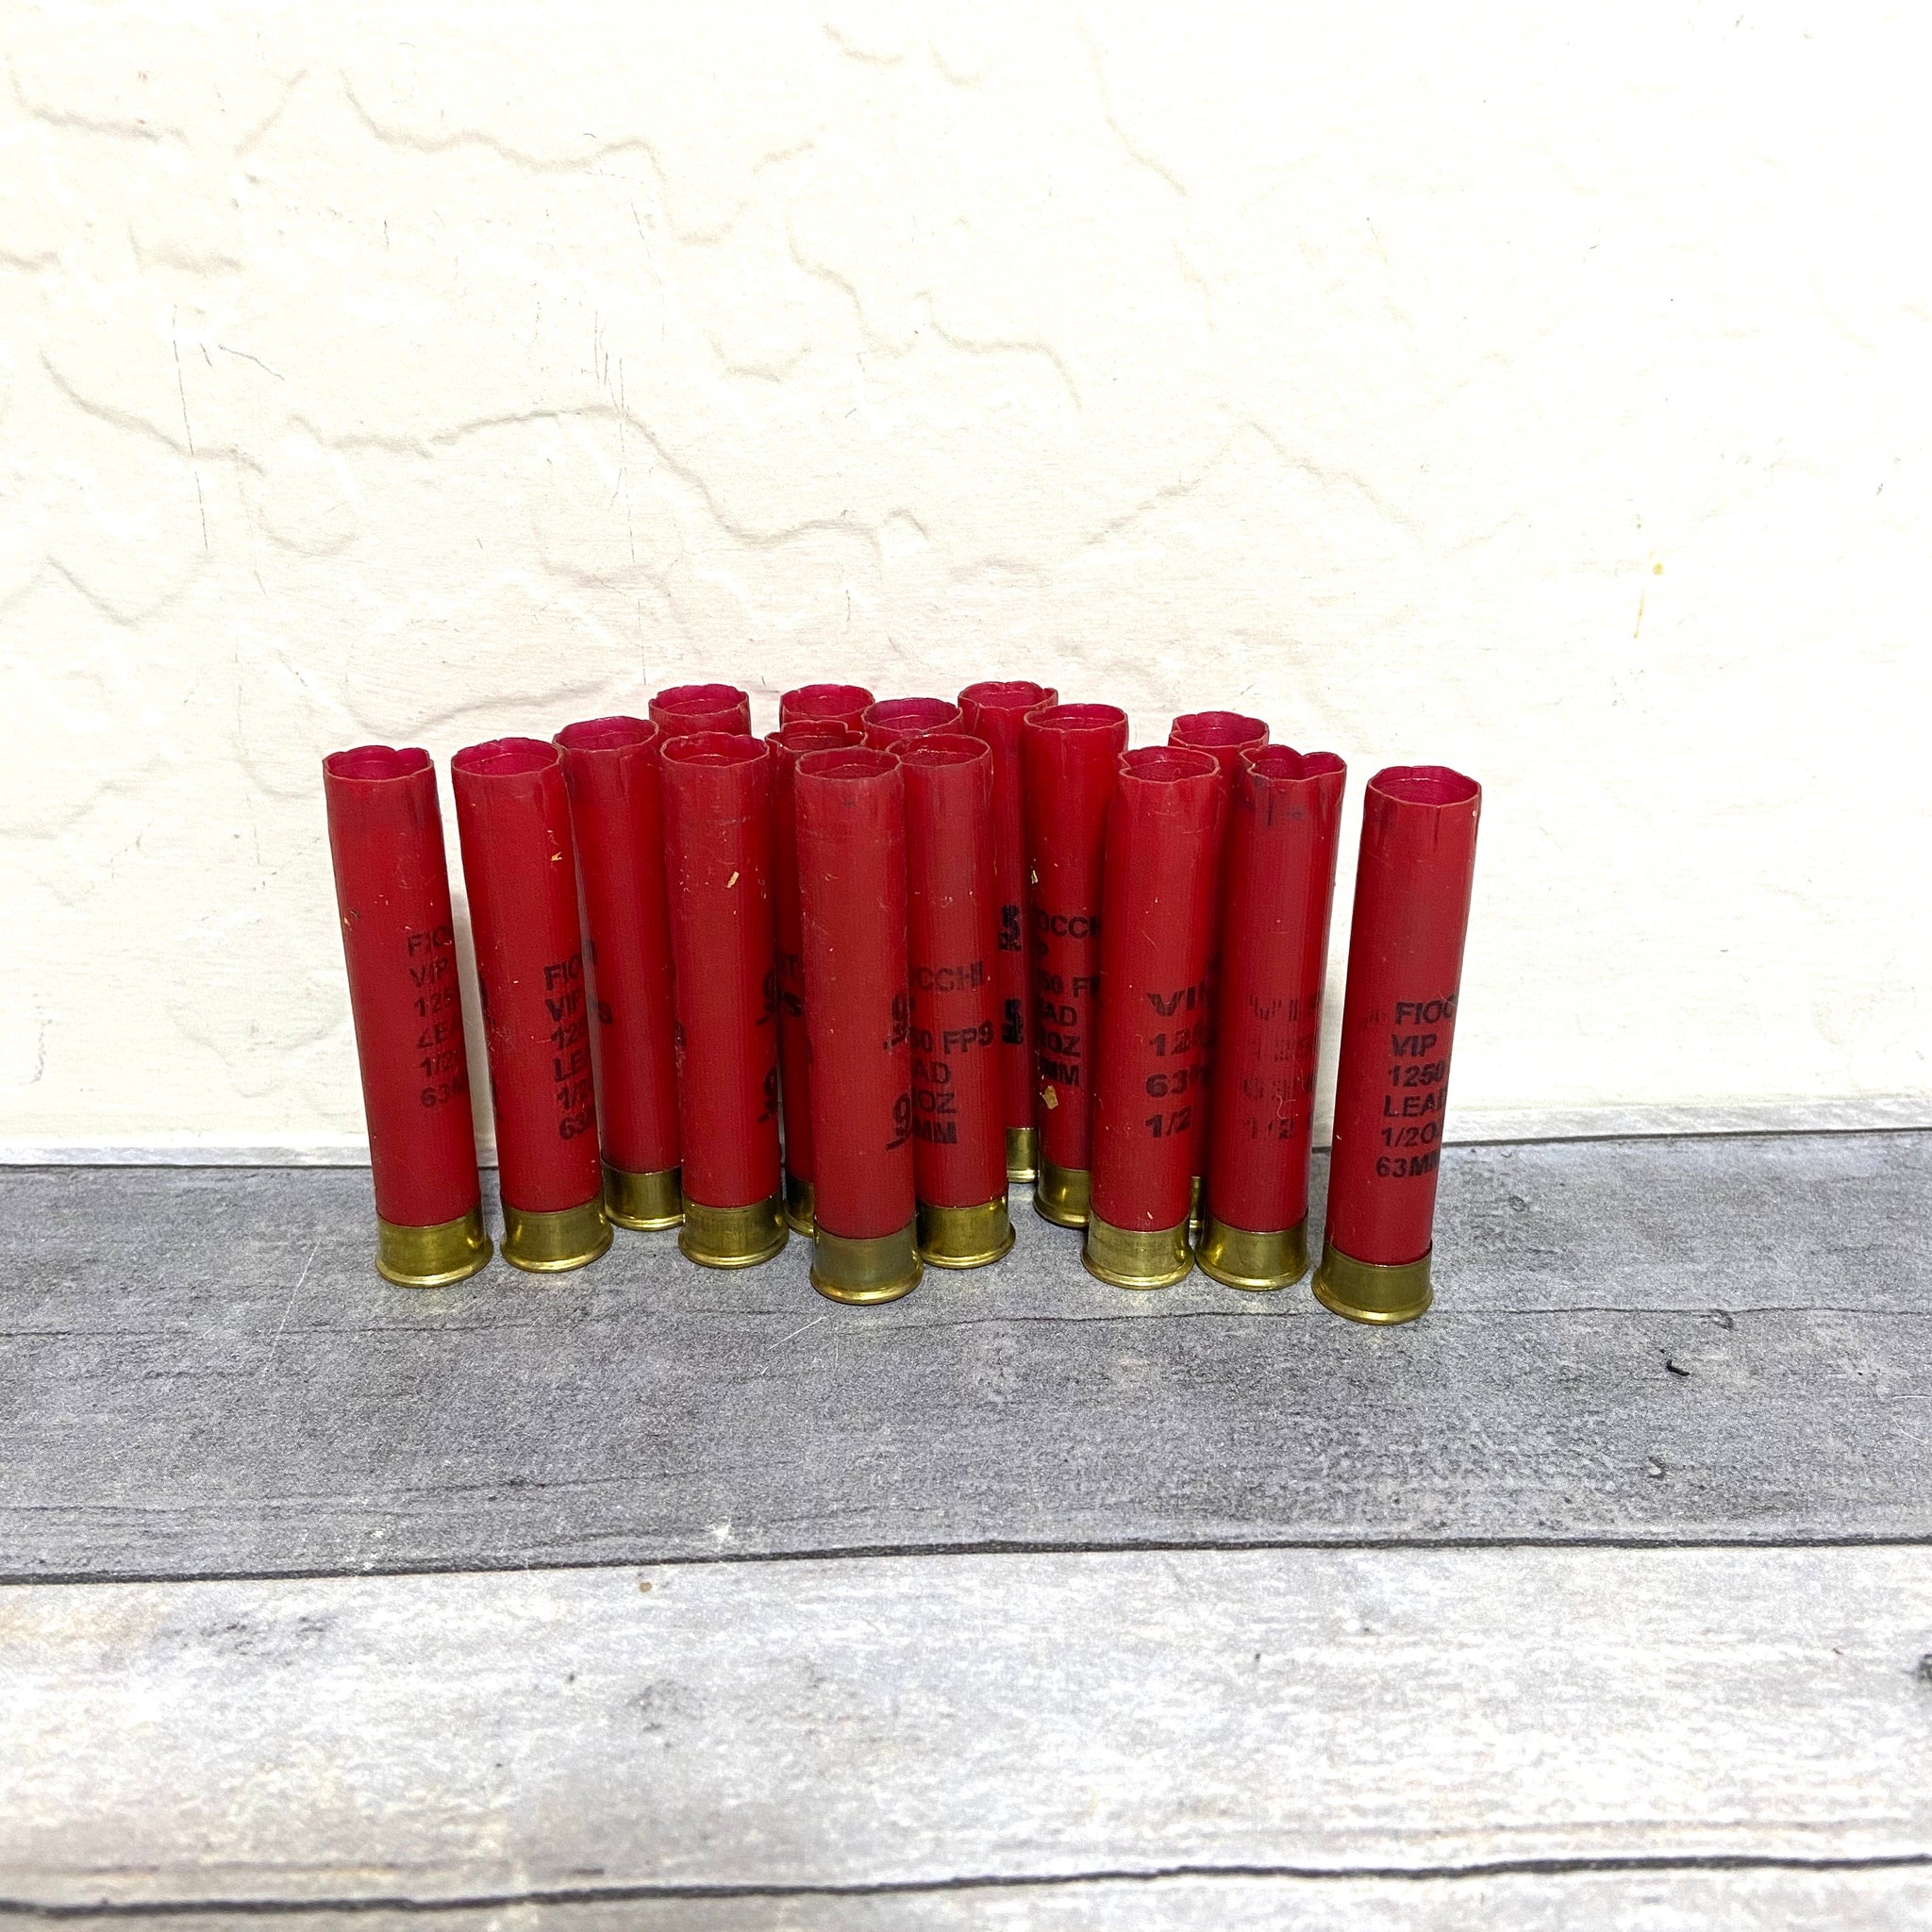 Red Shotgun Shell Casings. Placed On A Wooden Table Stock Photo, Picture  and Royalty Free Image. Image 73246261.